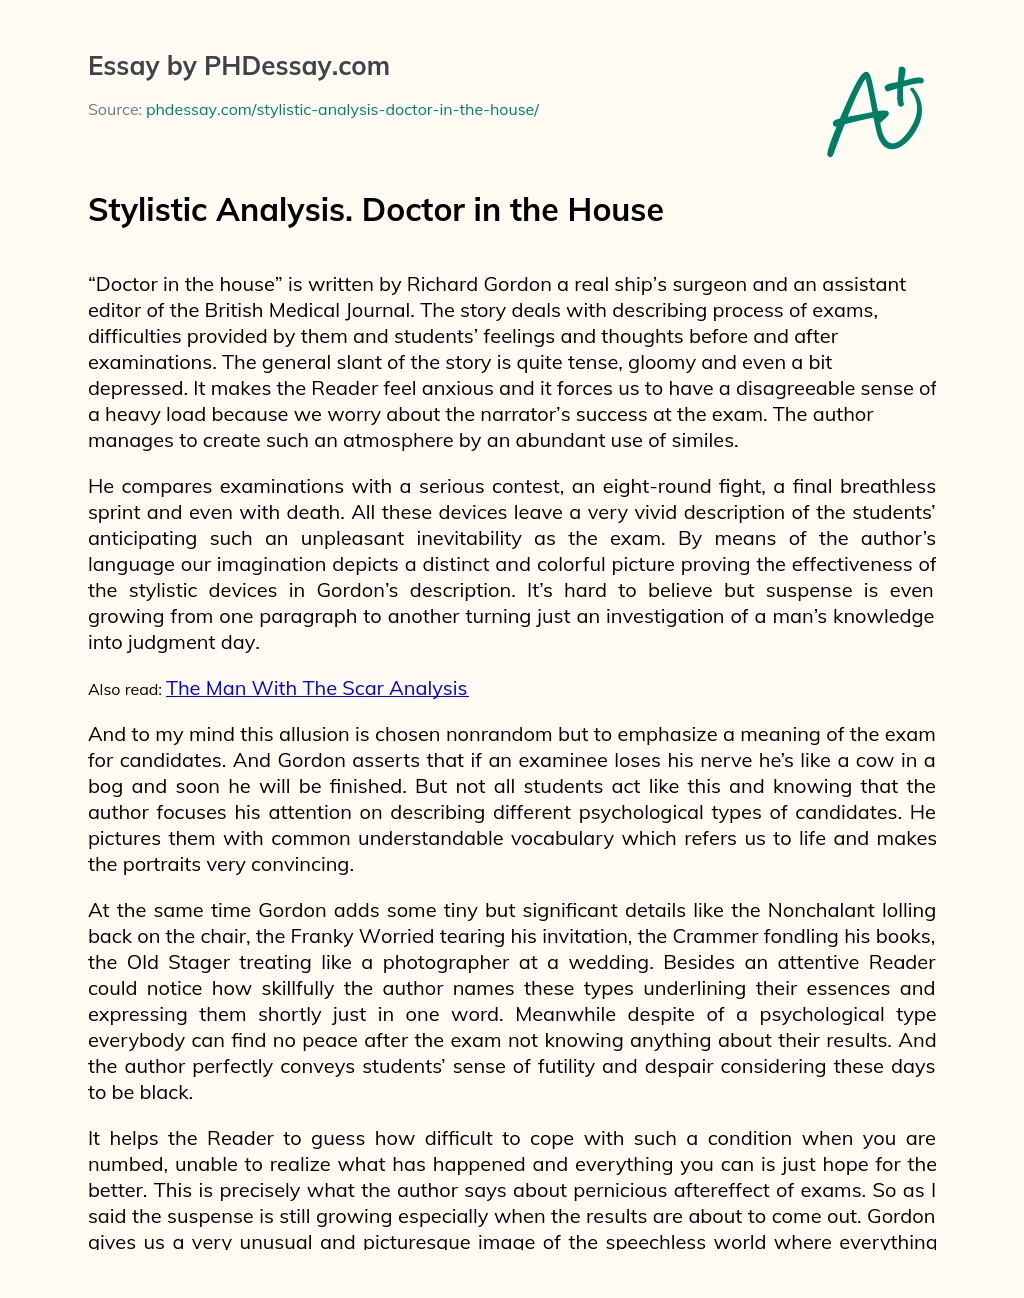 Stylistic Analysis. Doctor in the House essay